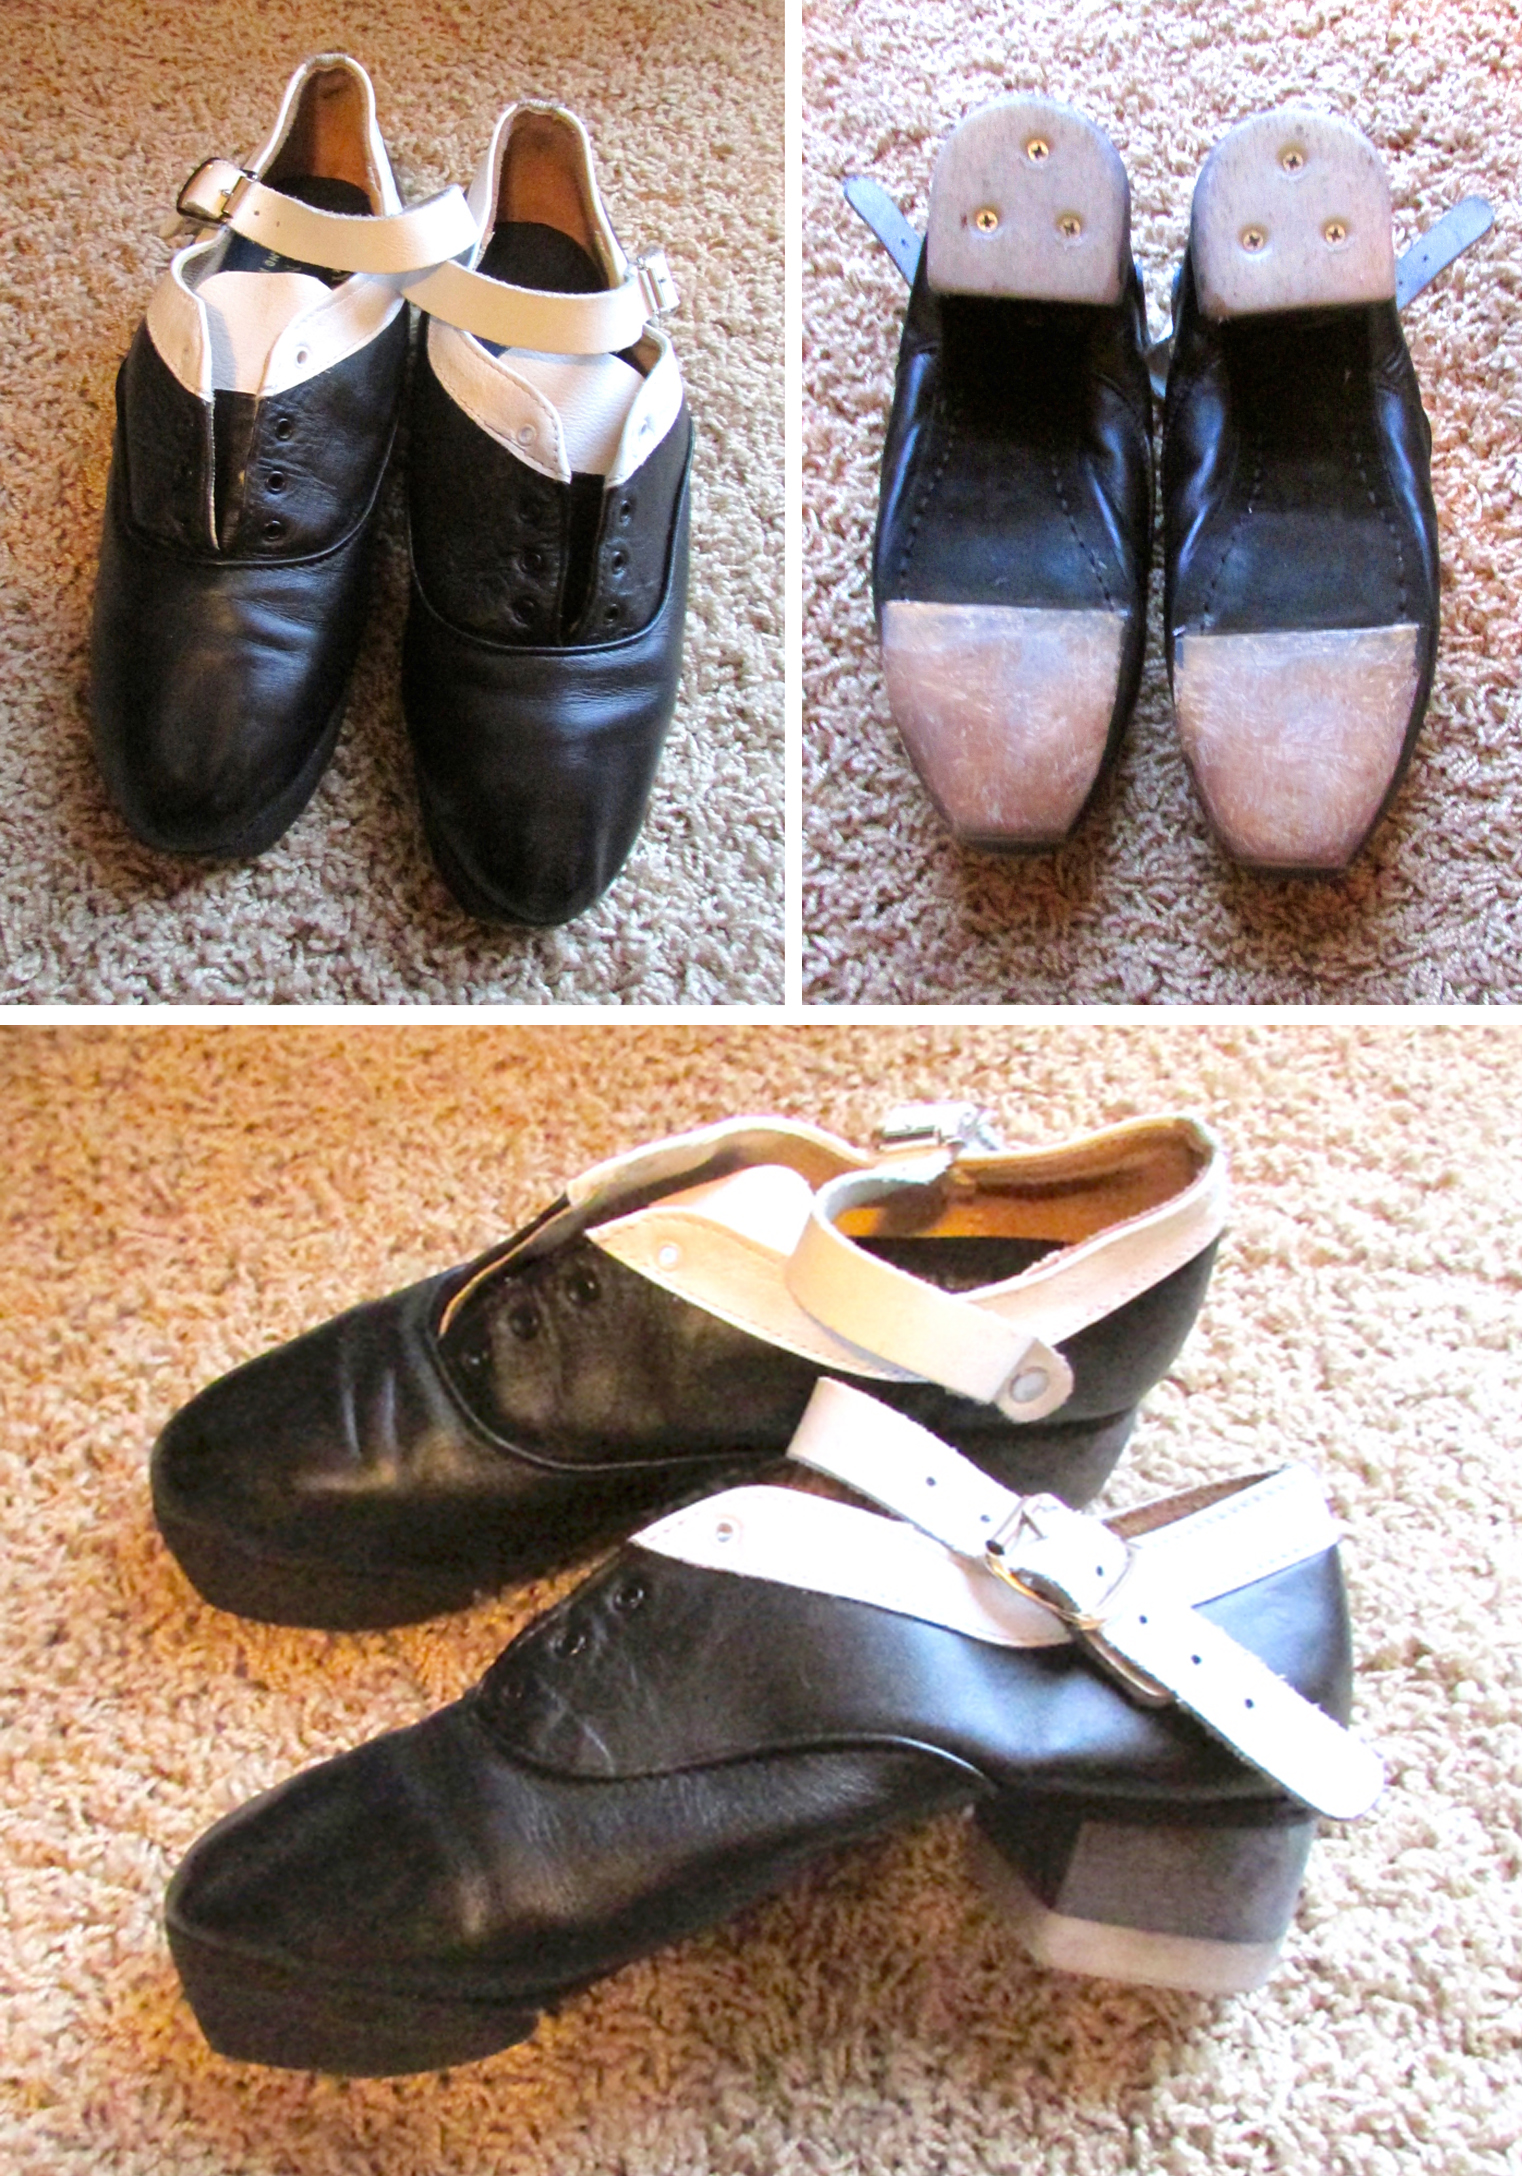 Irish Dance Shoes For Sale | Get That Dress